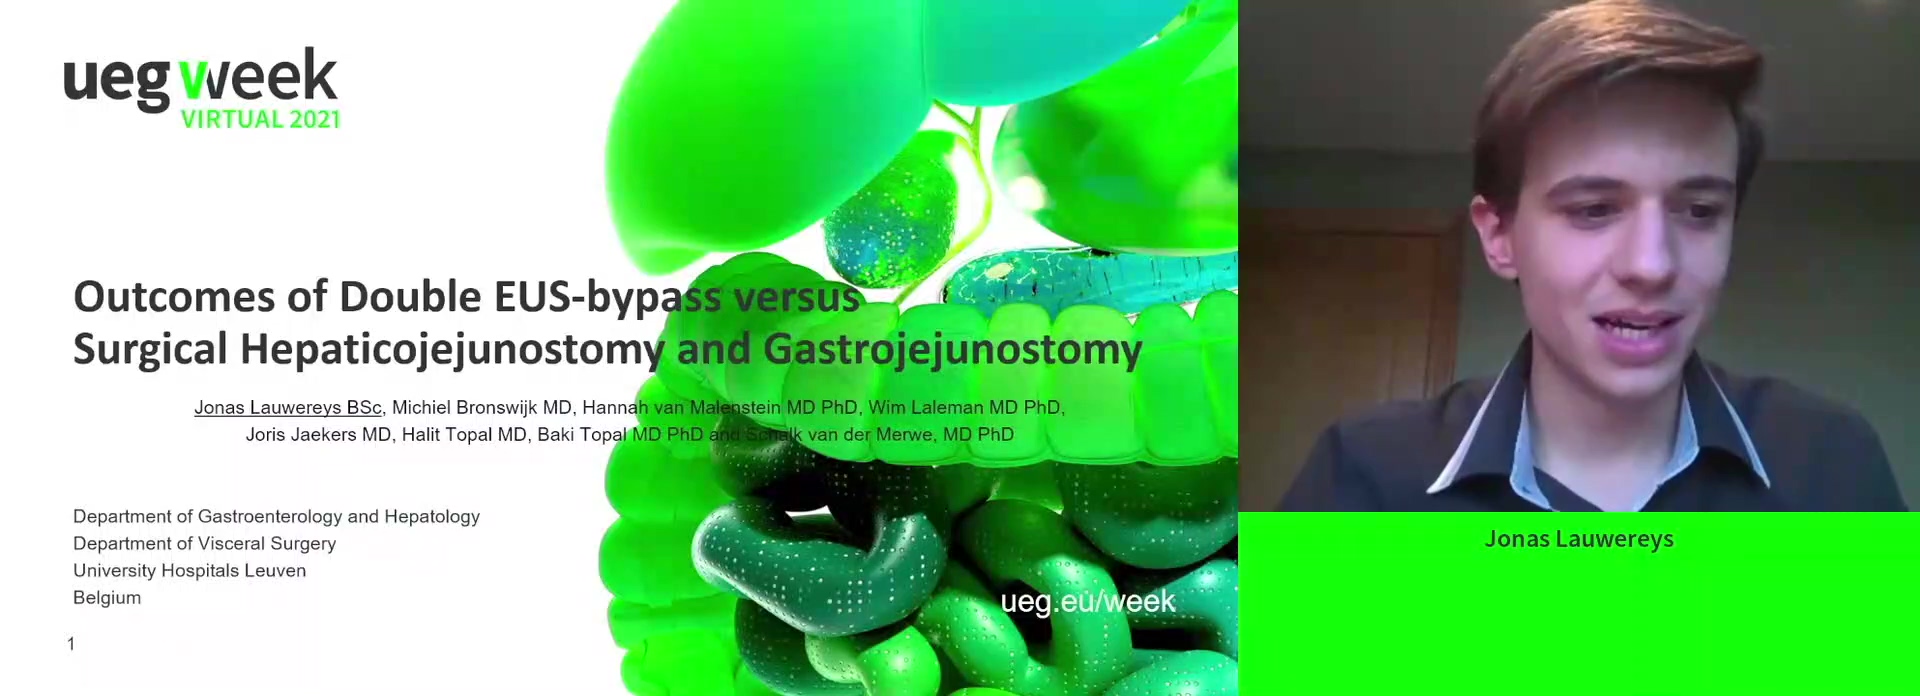 SAFETY AND EFFICACY OF DOUBLE EUS-BYPASS VERSUS SURGICAL HEPATICOJEJUNOSTOMY AND GASTROJEJUNOSTOMY